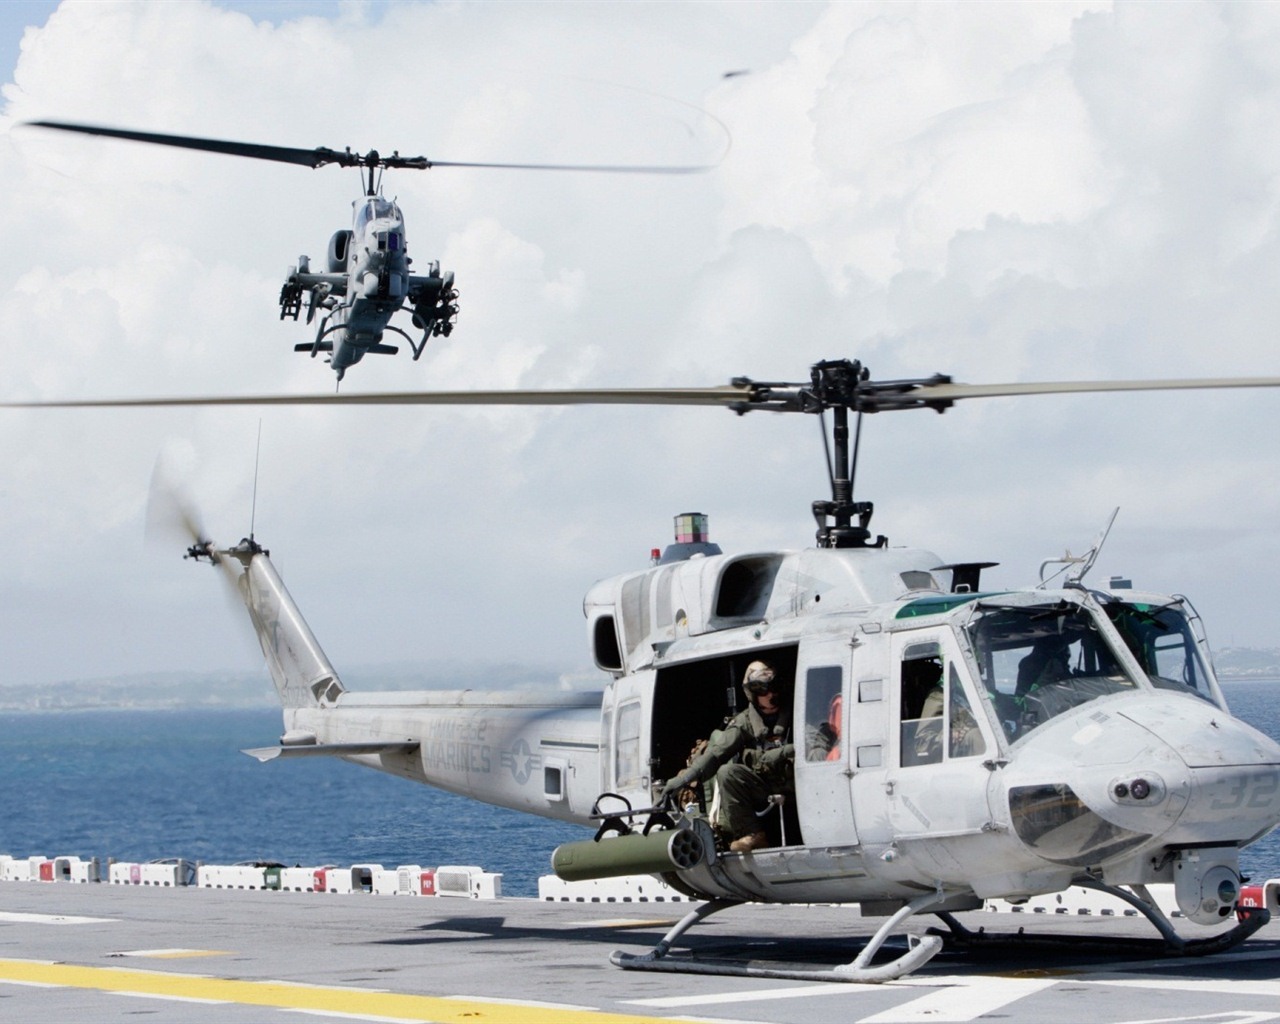 Military helicopters HD wallpapers #16 - 1280x1024